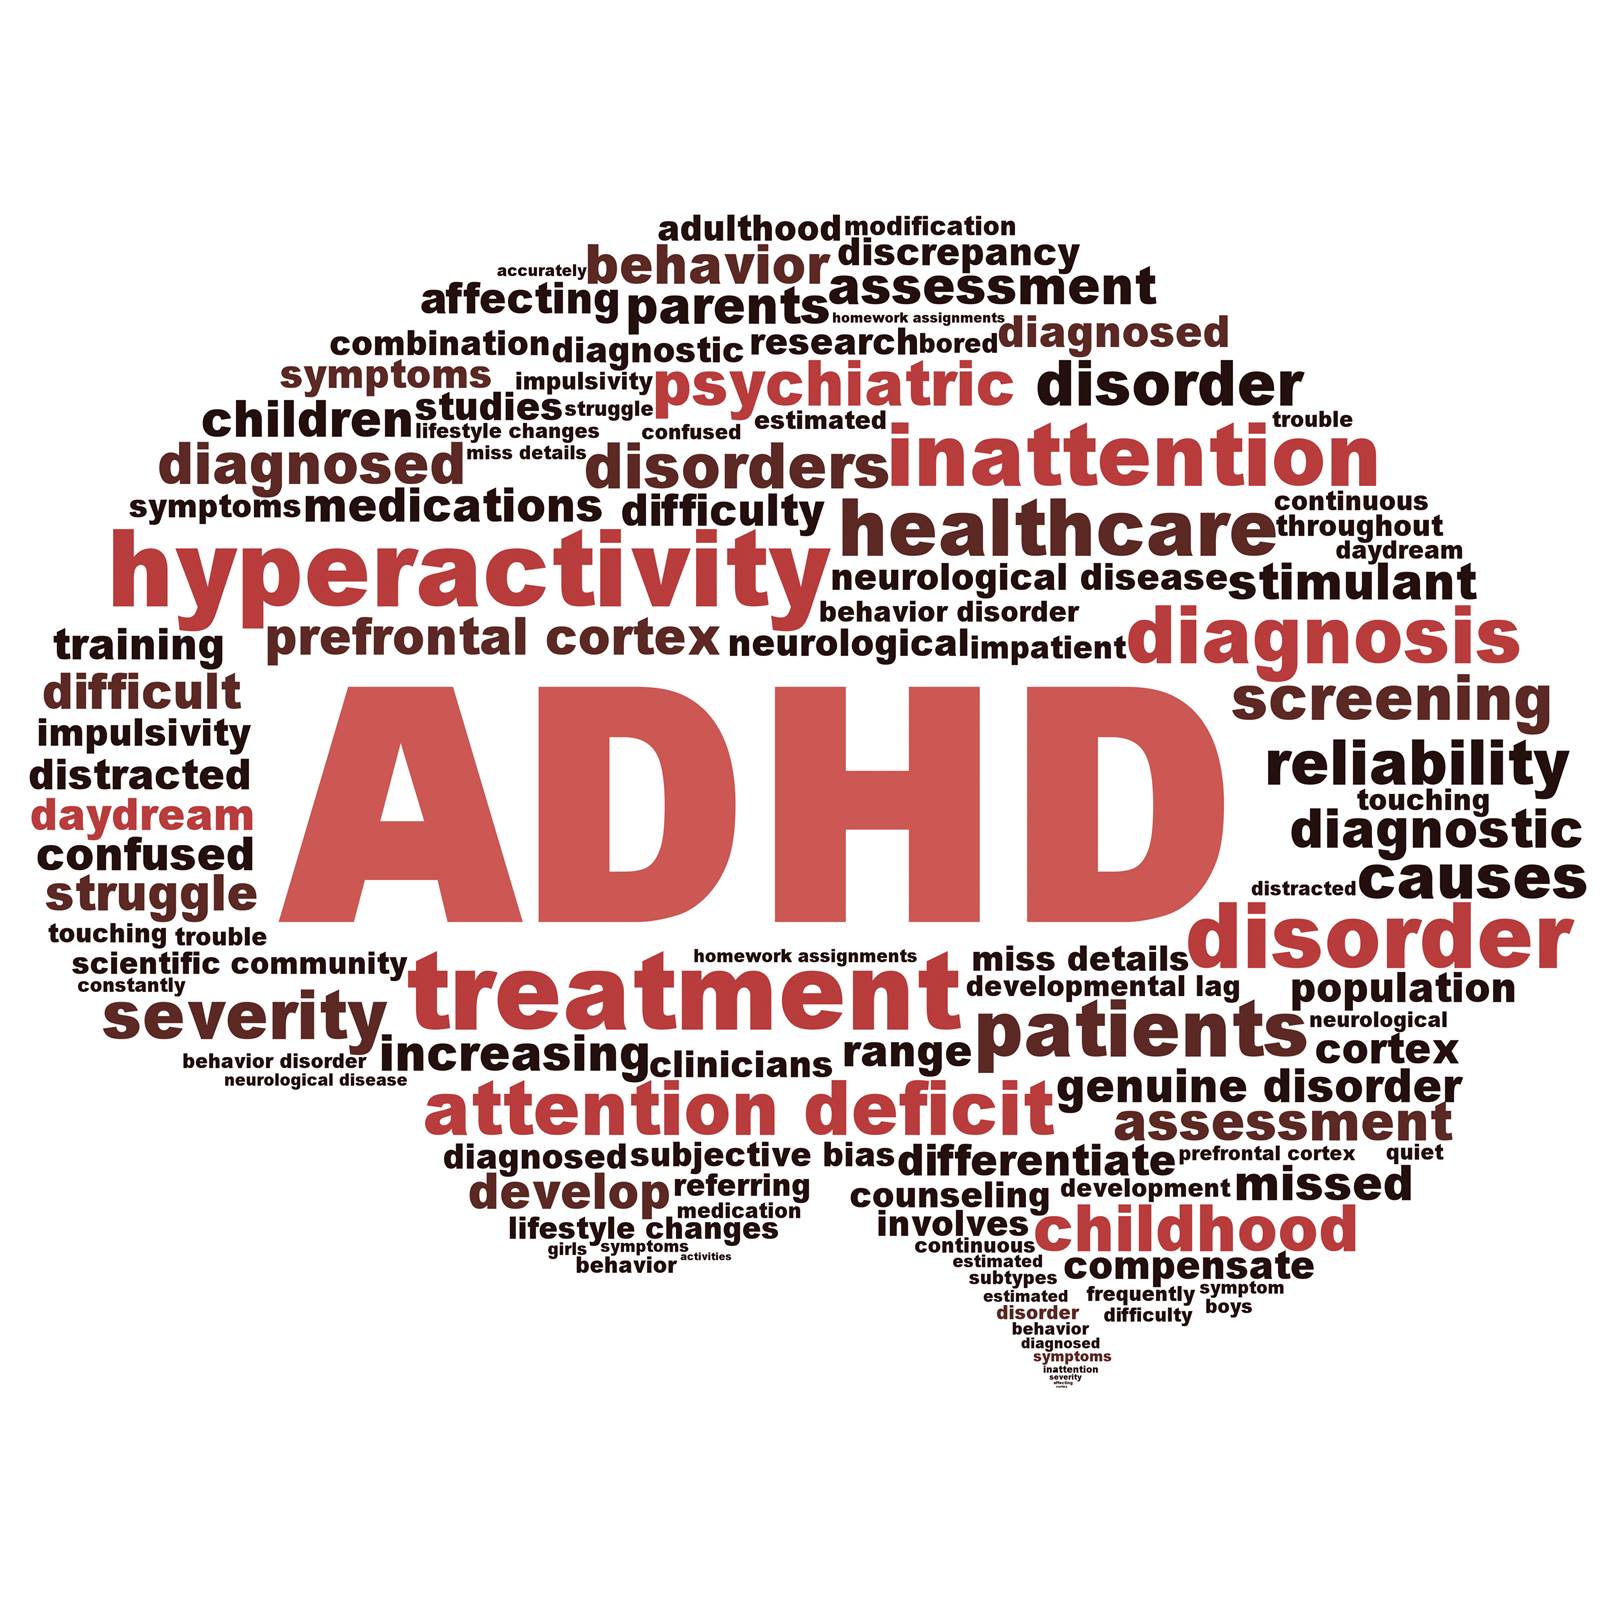 Let’s talk about ADHD and Medication